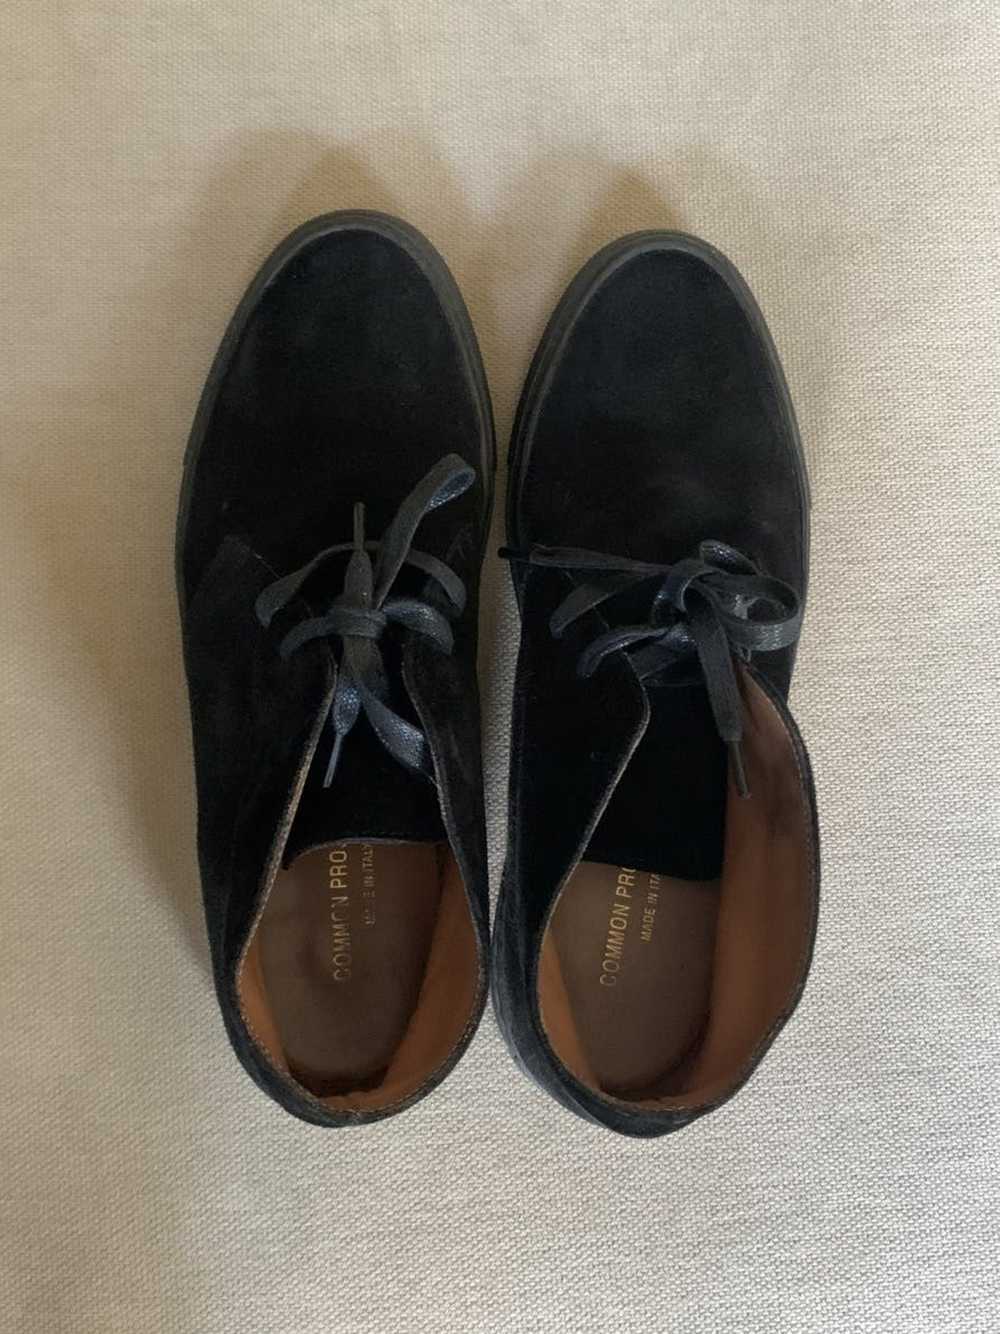 Common Projects Chukka Suede in Black - image 2